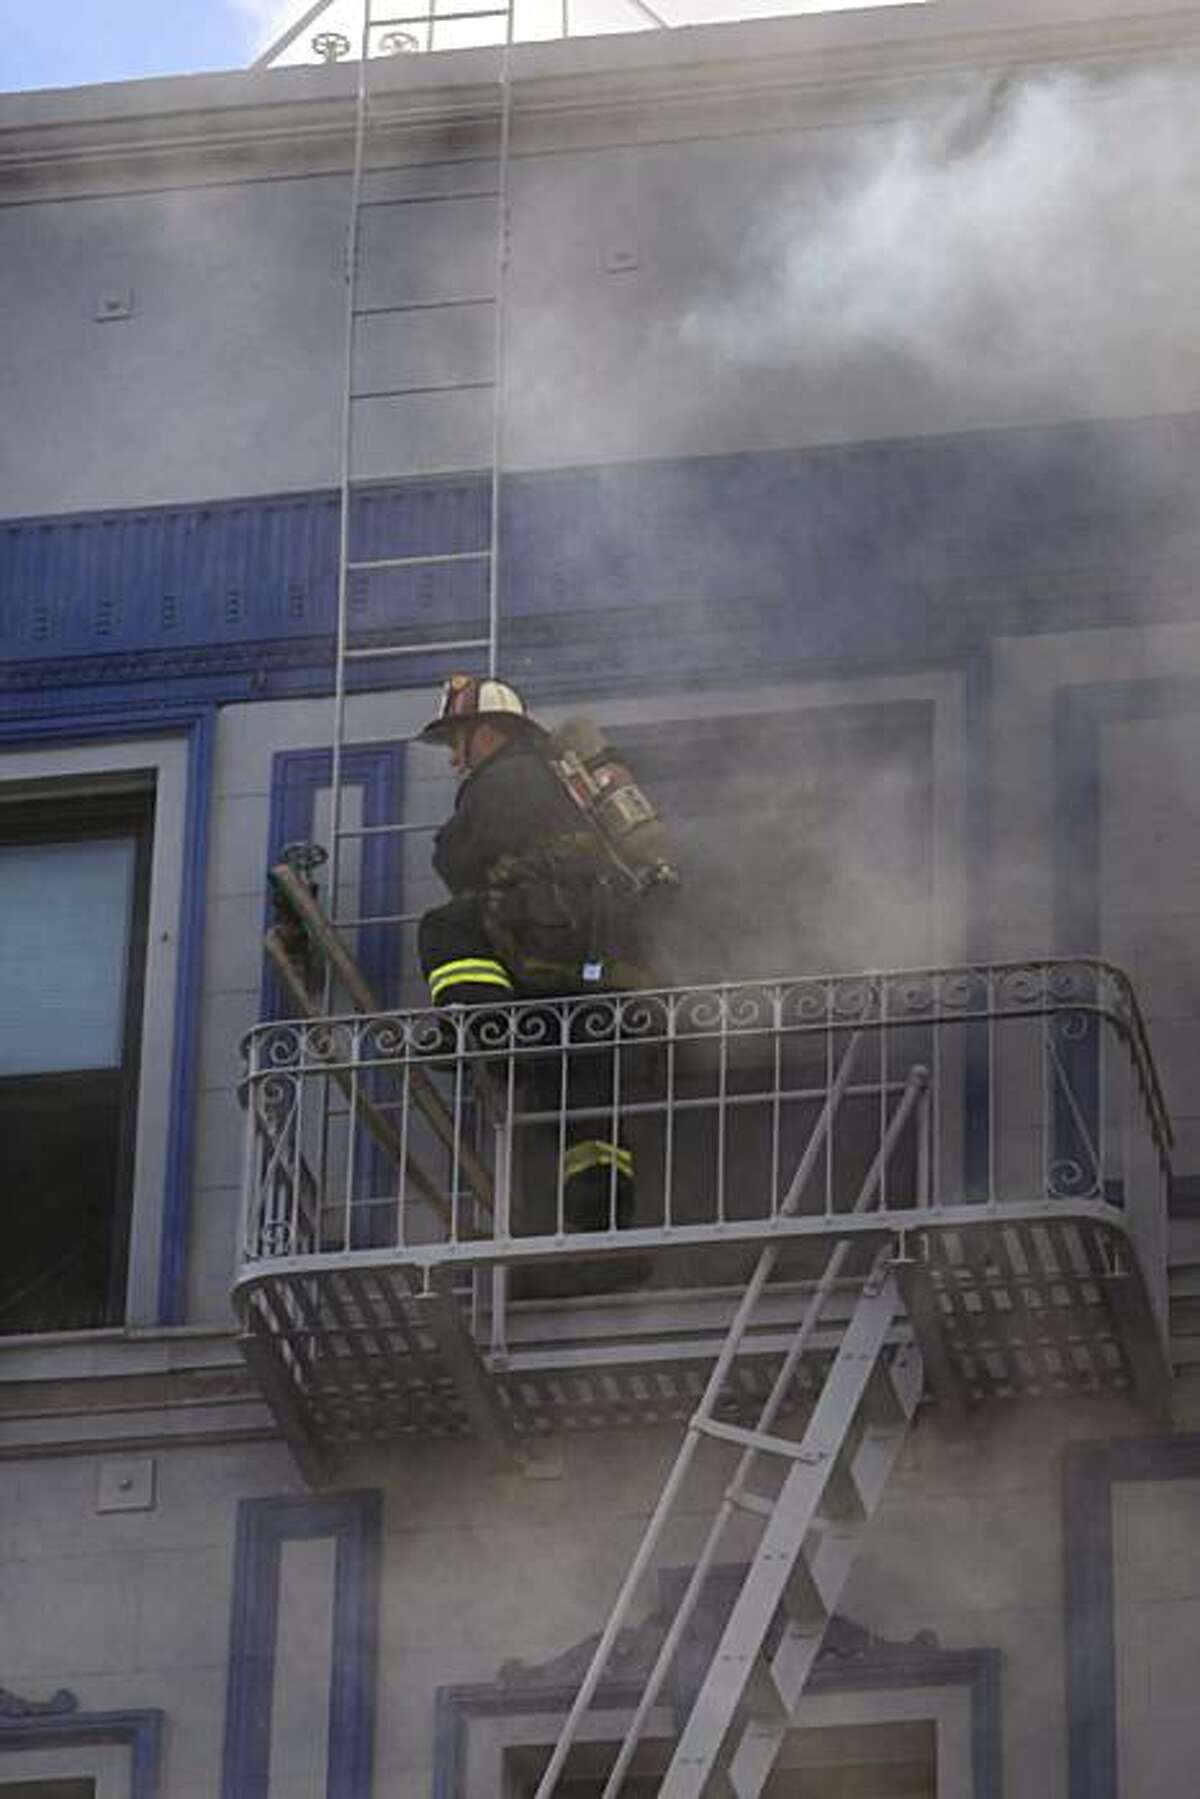 A San Francisco firefighter climbs on a fire escape as others work on a structure fire at 111 Taylor St. on Thursday. The building is a halfway house for parolees.